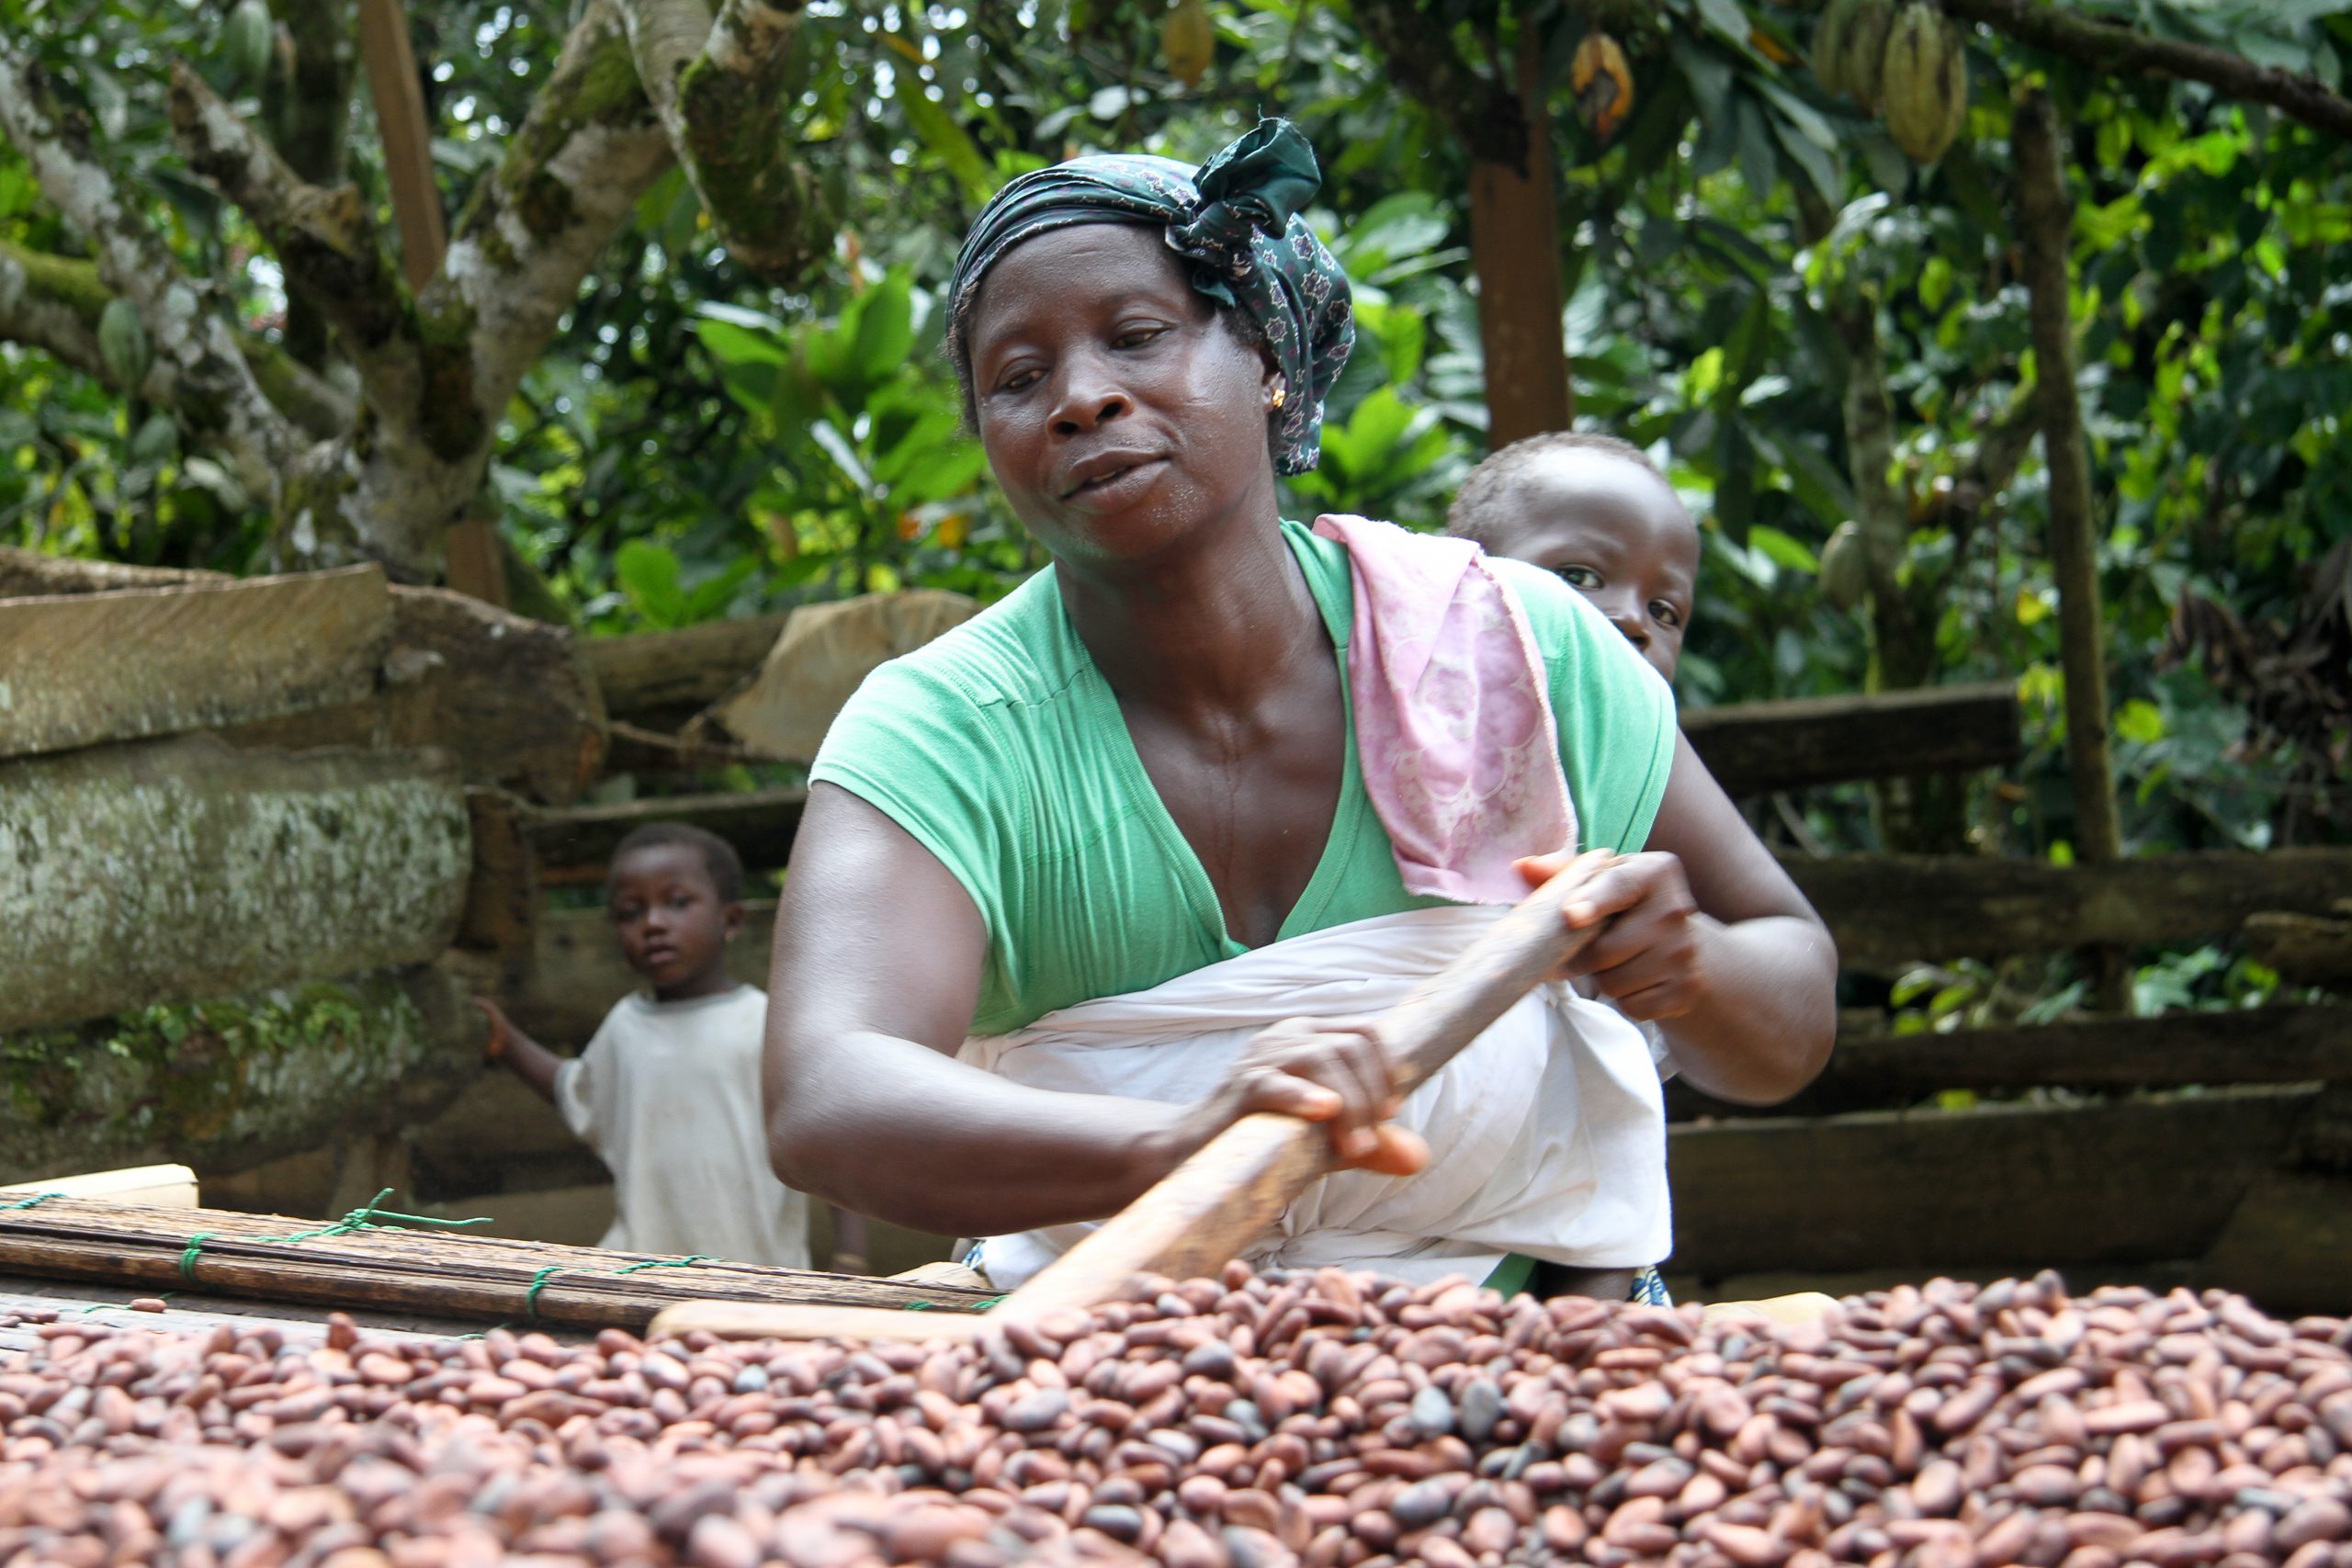 a woman in ghana, africa, racks cocoa beans with a baby on her back